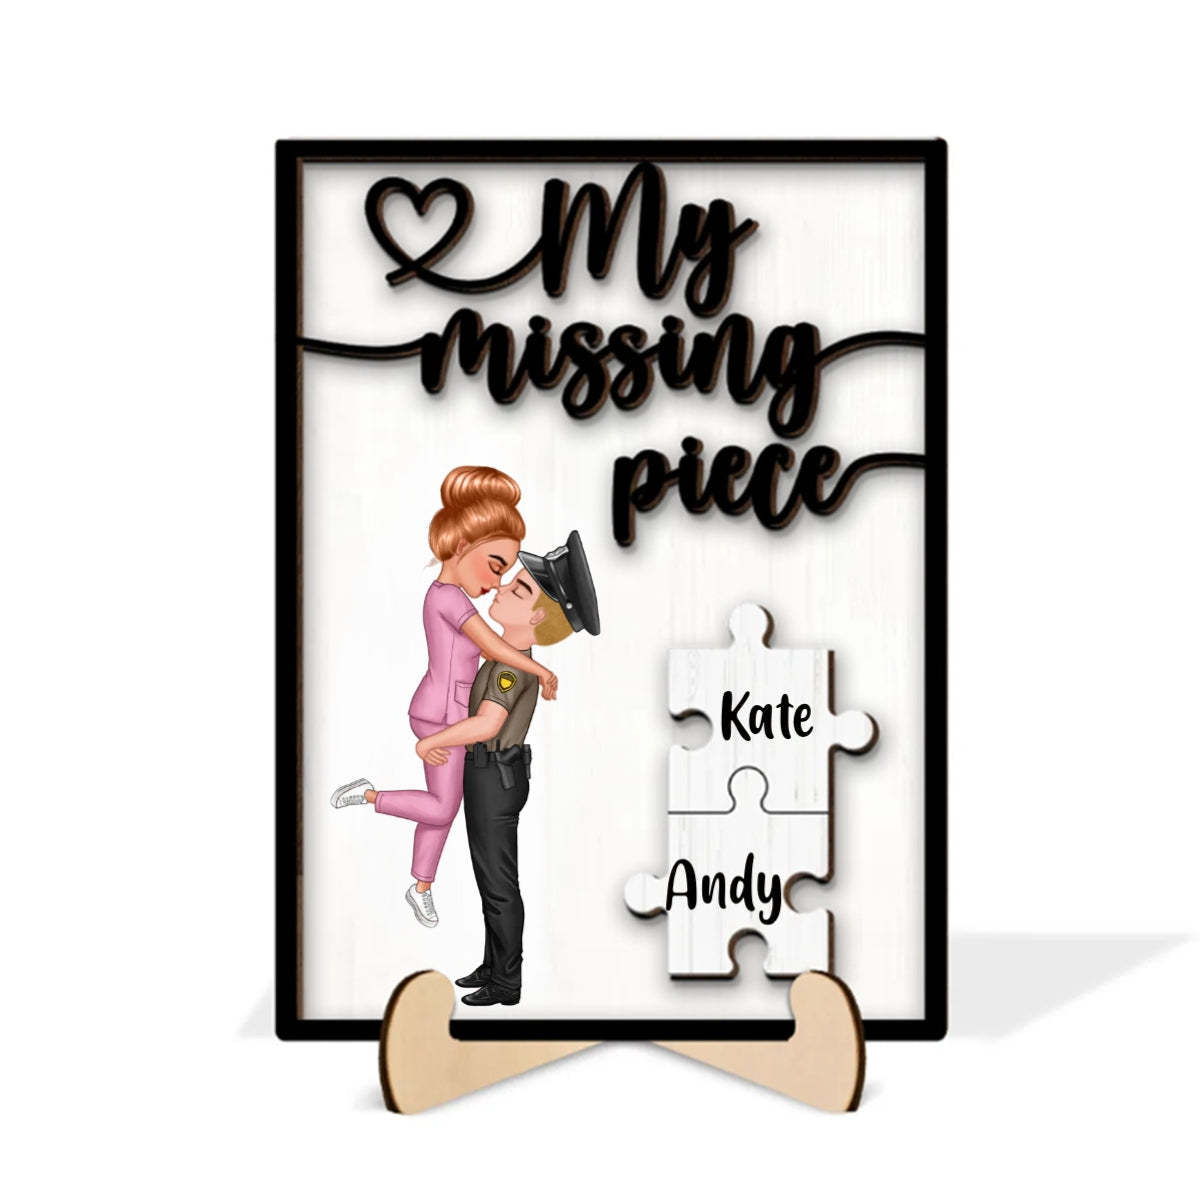 My Missing Piece Valentine's Day Gifts for Her/Him Personalized Wooden Plaque - Get Photo Blanket